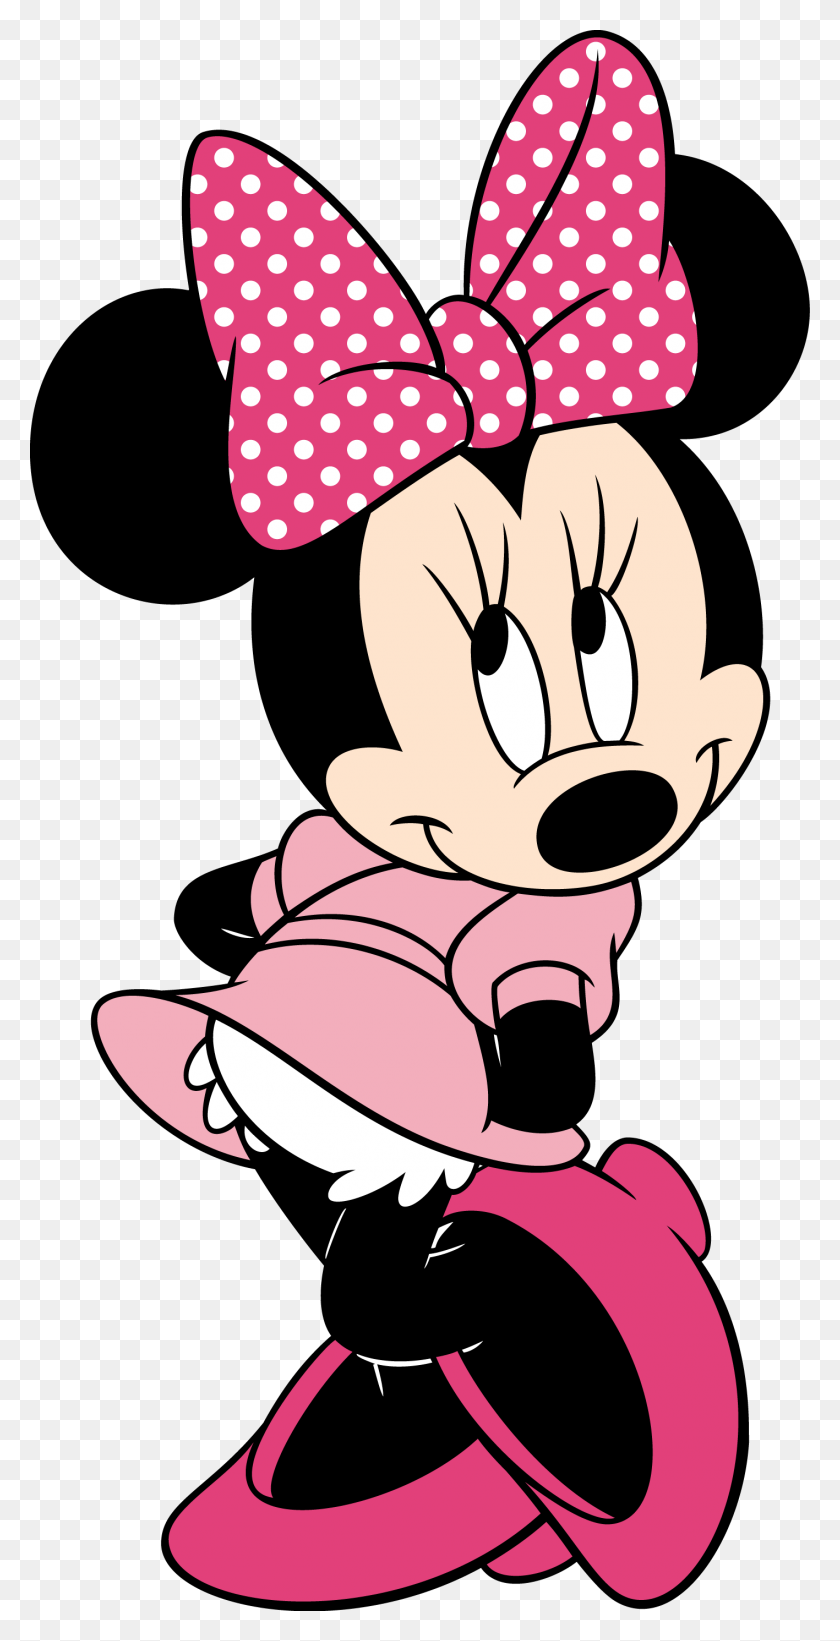 1417x2873 Baby Minnie Mouse Vector - Baby Minnie Mouse PNG